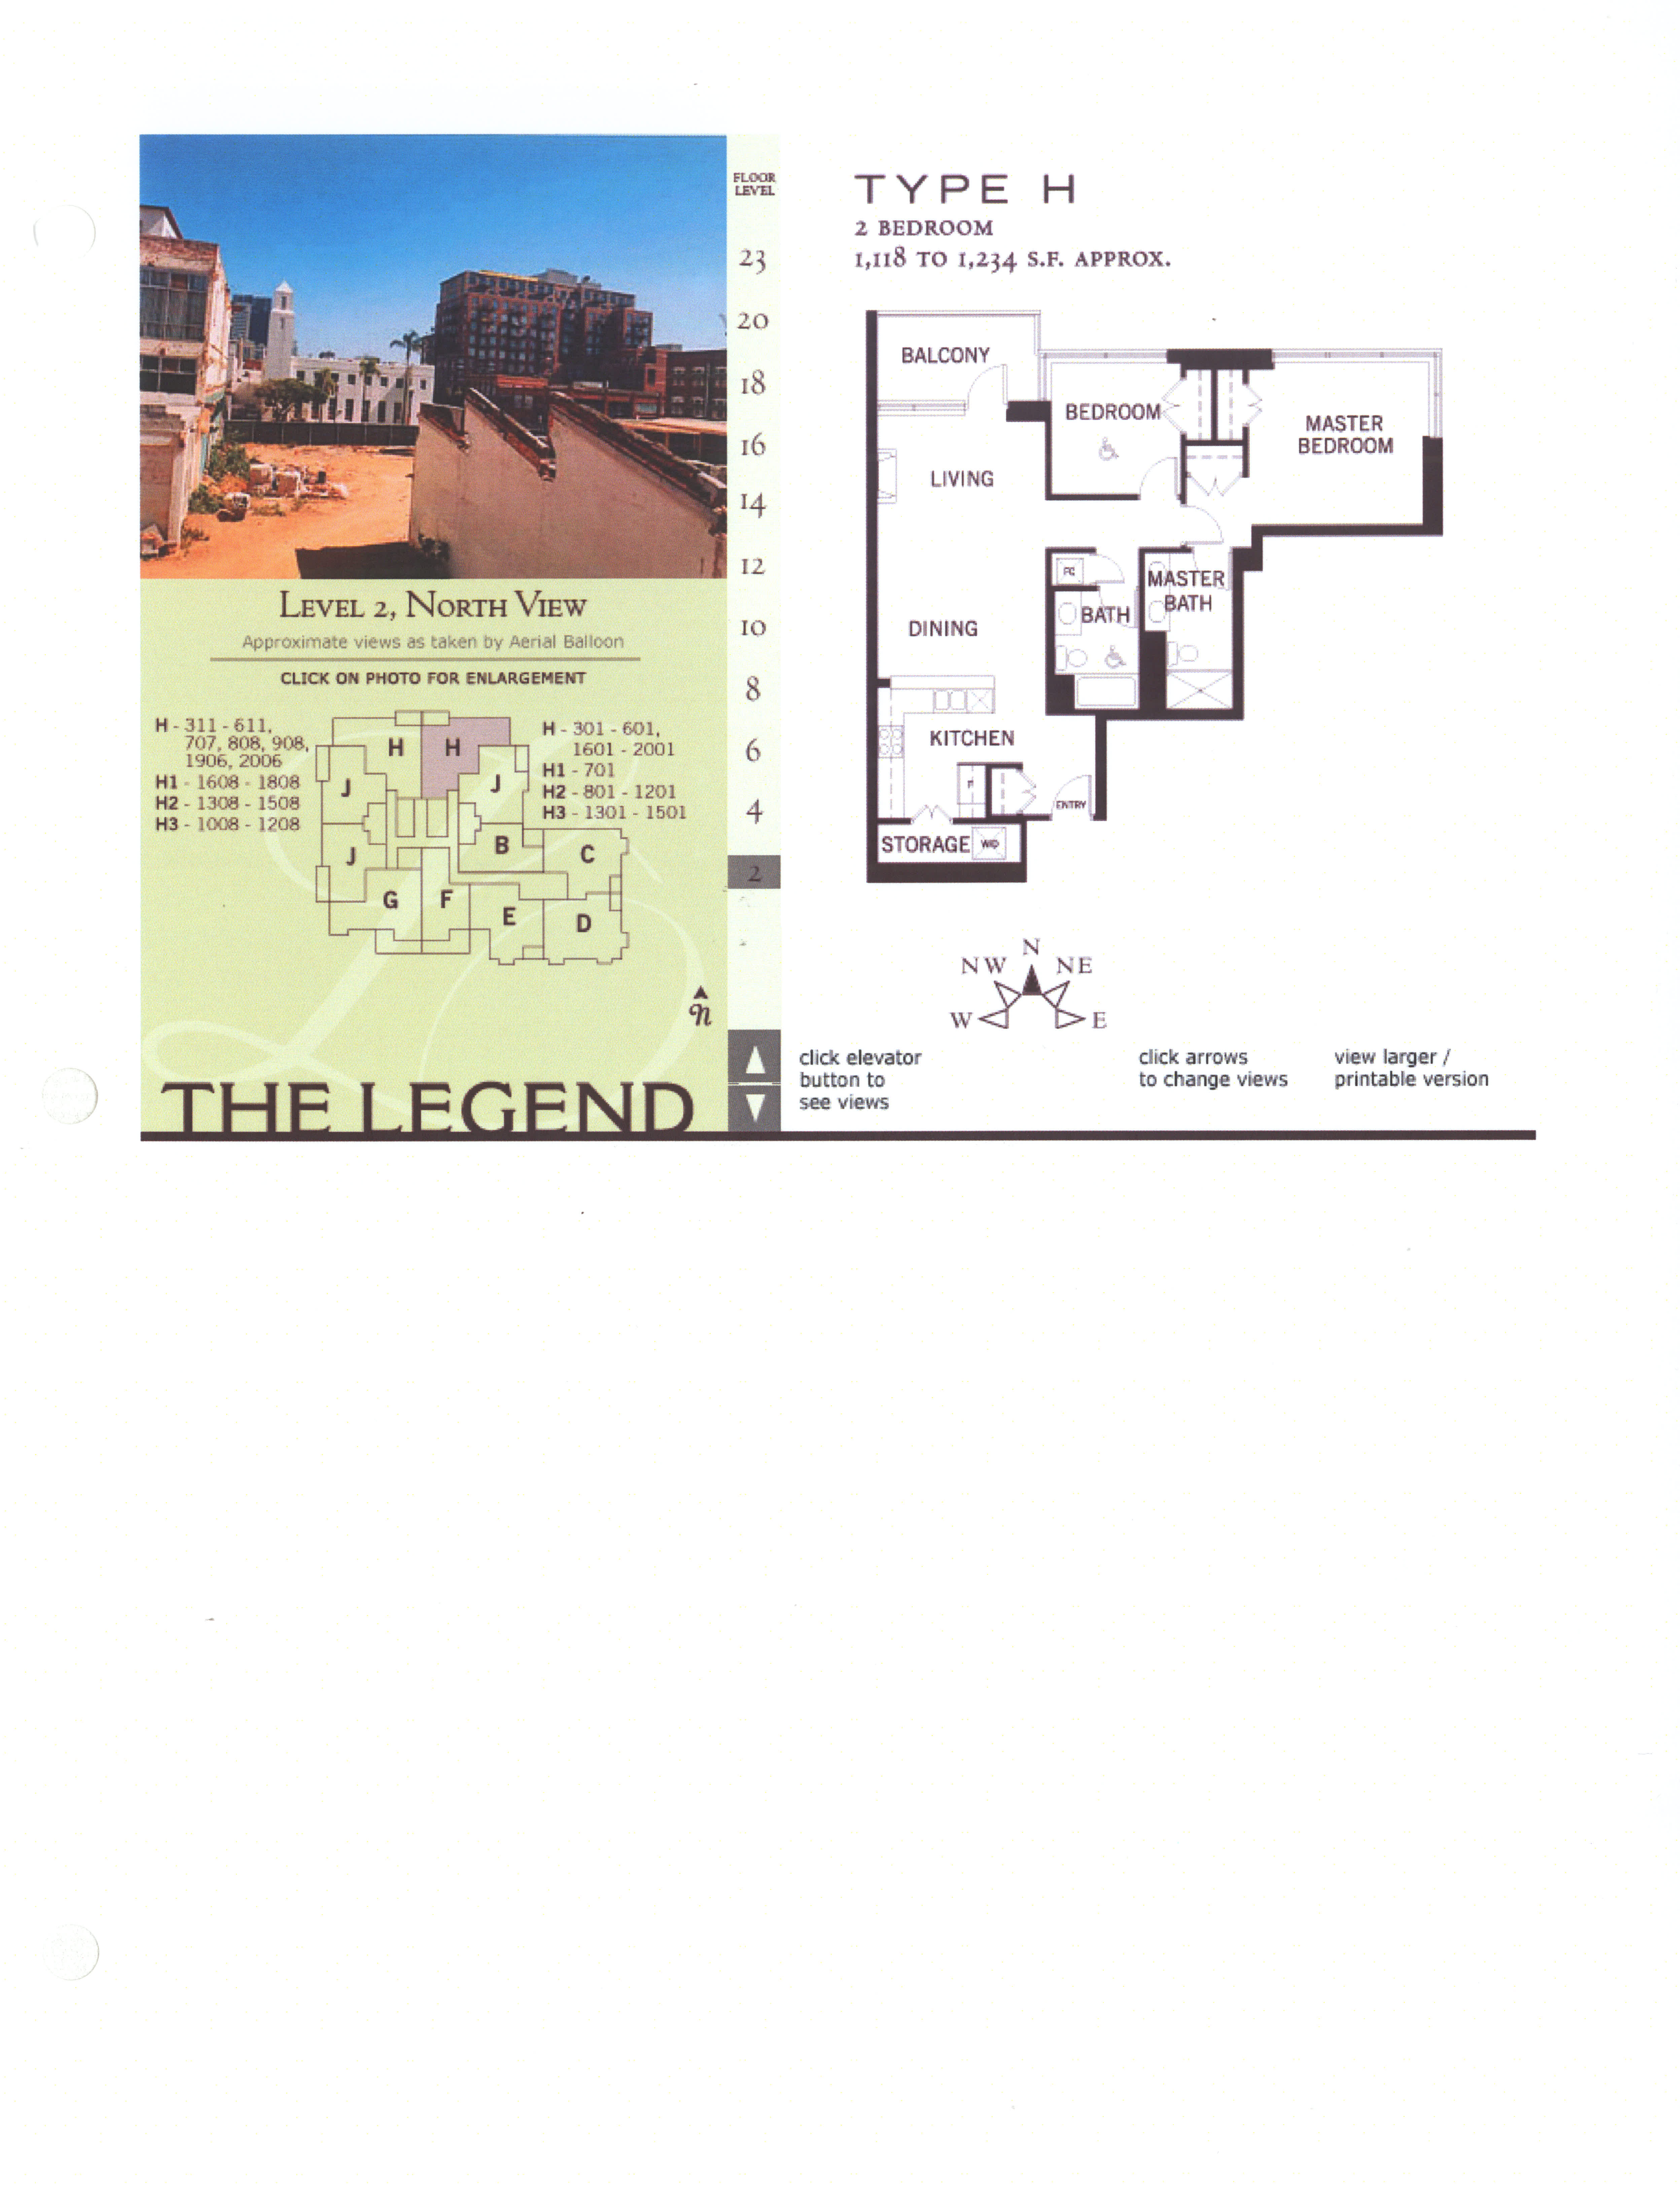 The Legend Floor Plan Level 2, North View – Type H